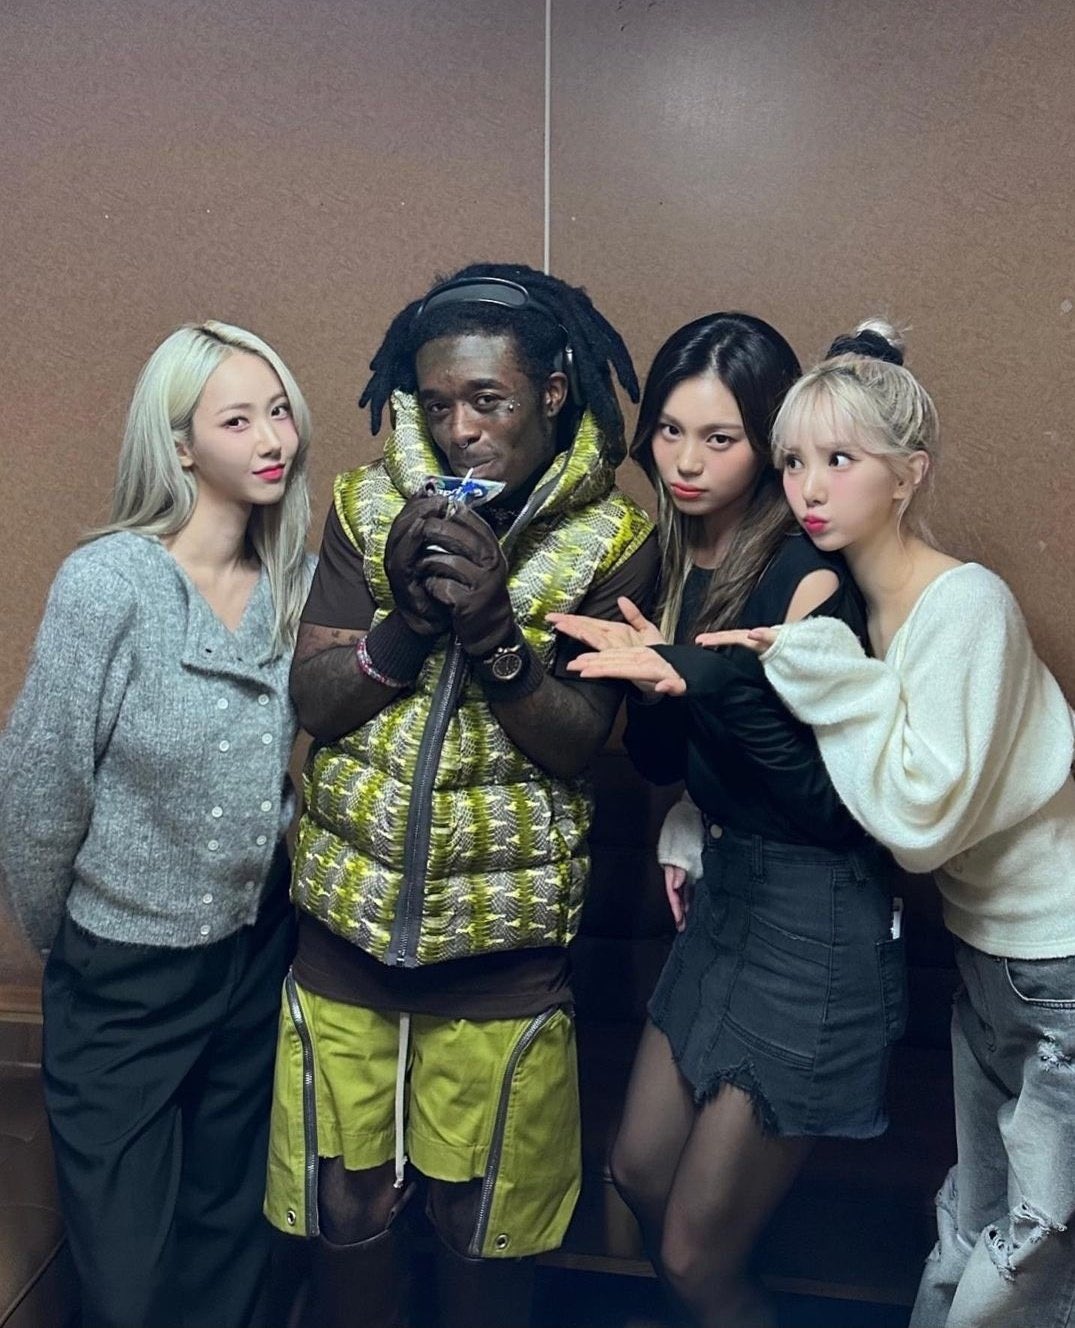 X \ Pop Crave على X: "Lil Uzi Vert with the members of GFRIEND in newly  shared photos. https://t.co/4ZwN7bsb9u"